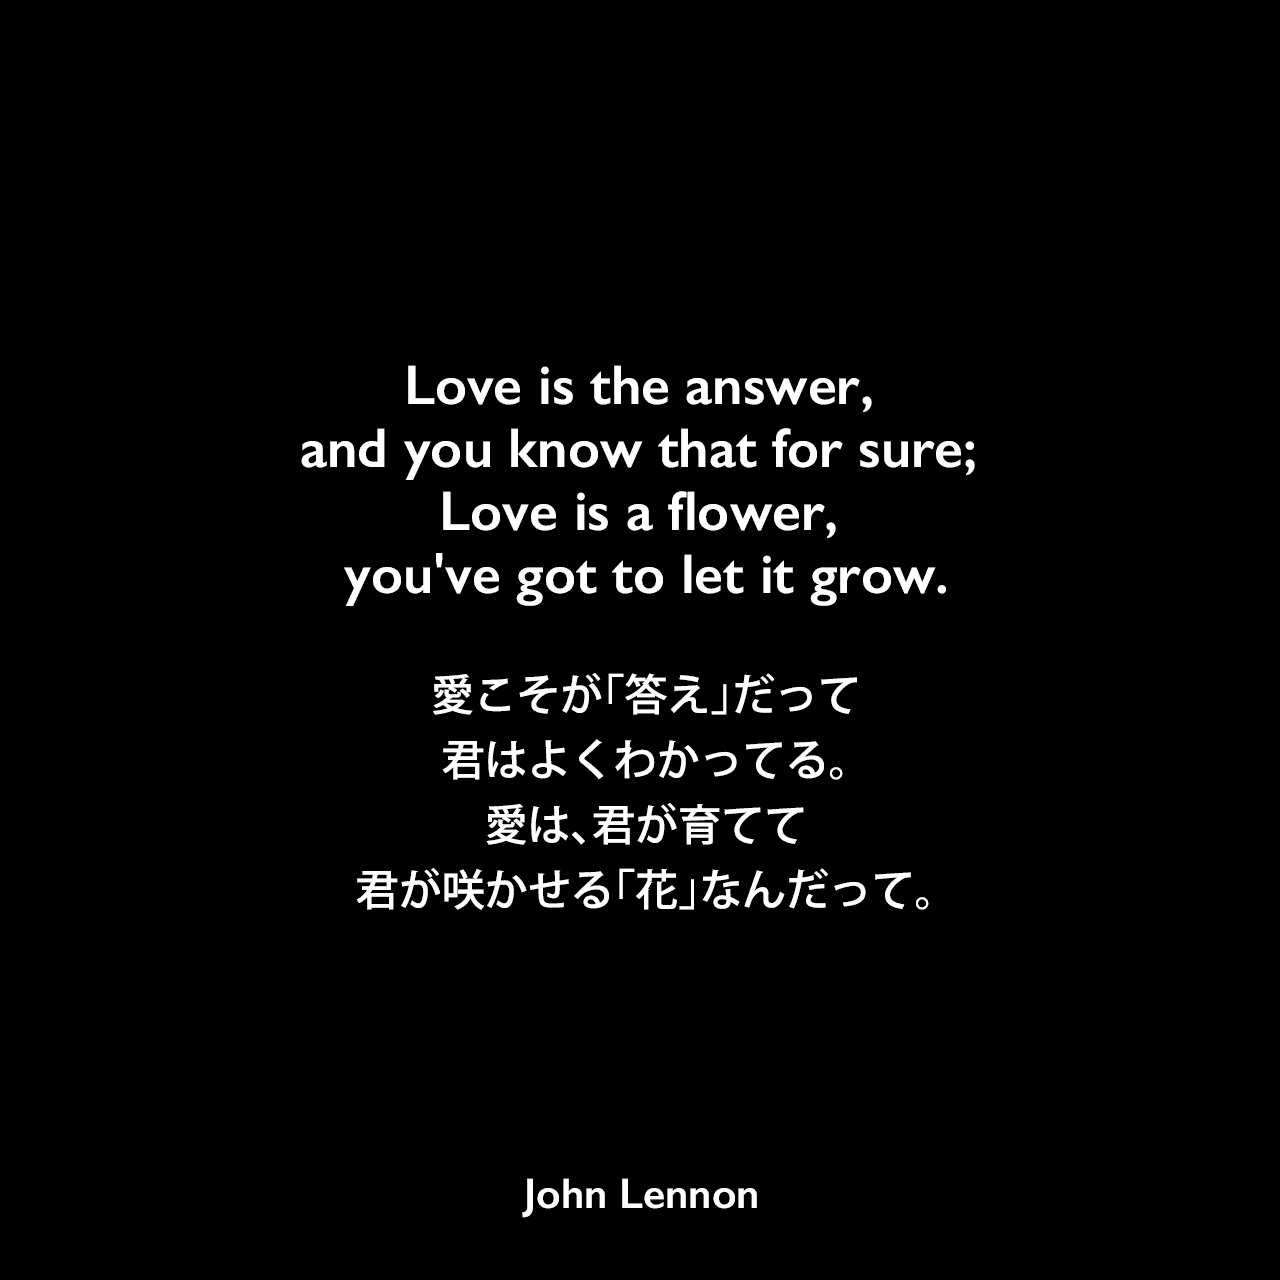 Love is the answer, and you know that for sure; Love is a flower, you've got to let it grow.愛こそが「答え」だって君はよくわかってる。愛は、君が育てて、君が咲かせる「花」なんだってJohn Lennon